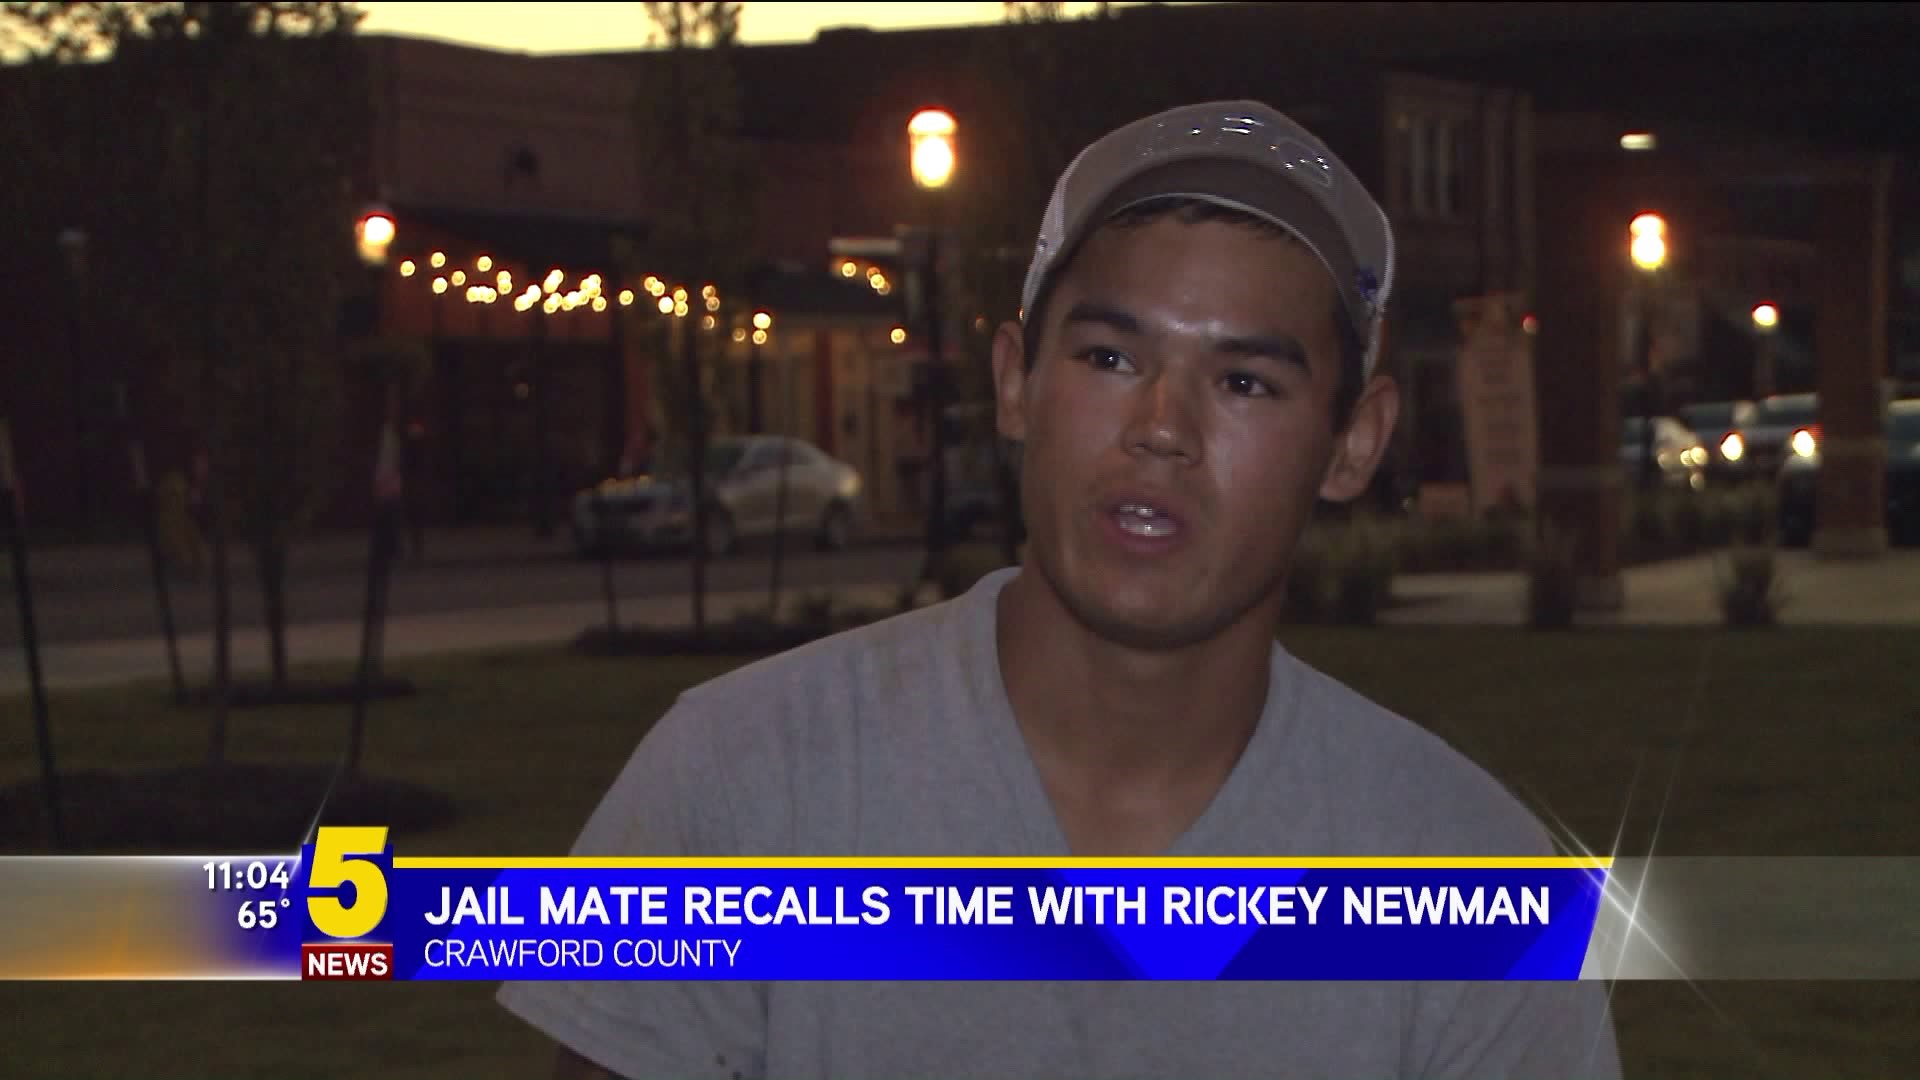 Jail Mate Recalls Time With Rickey Newman